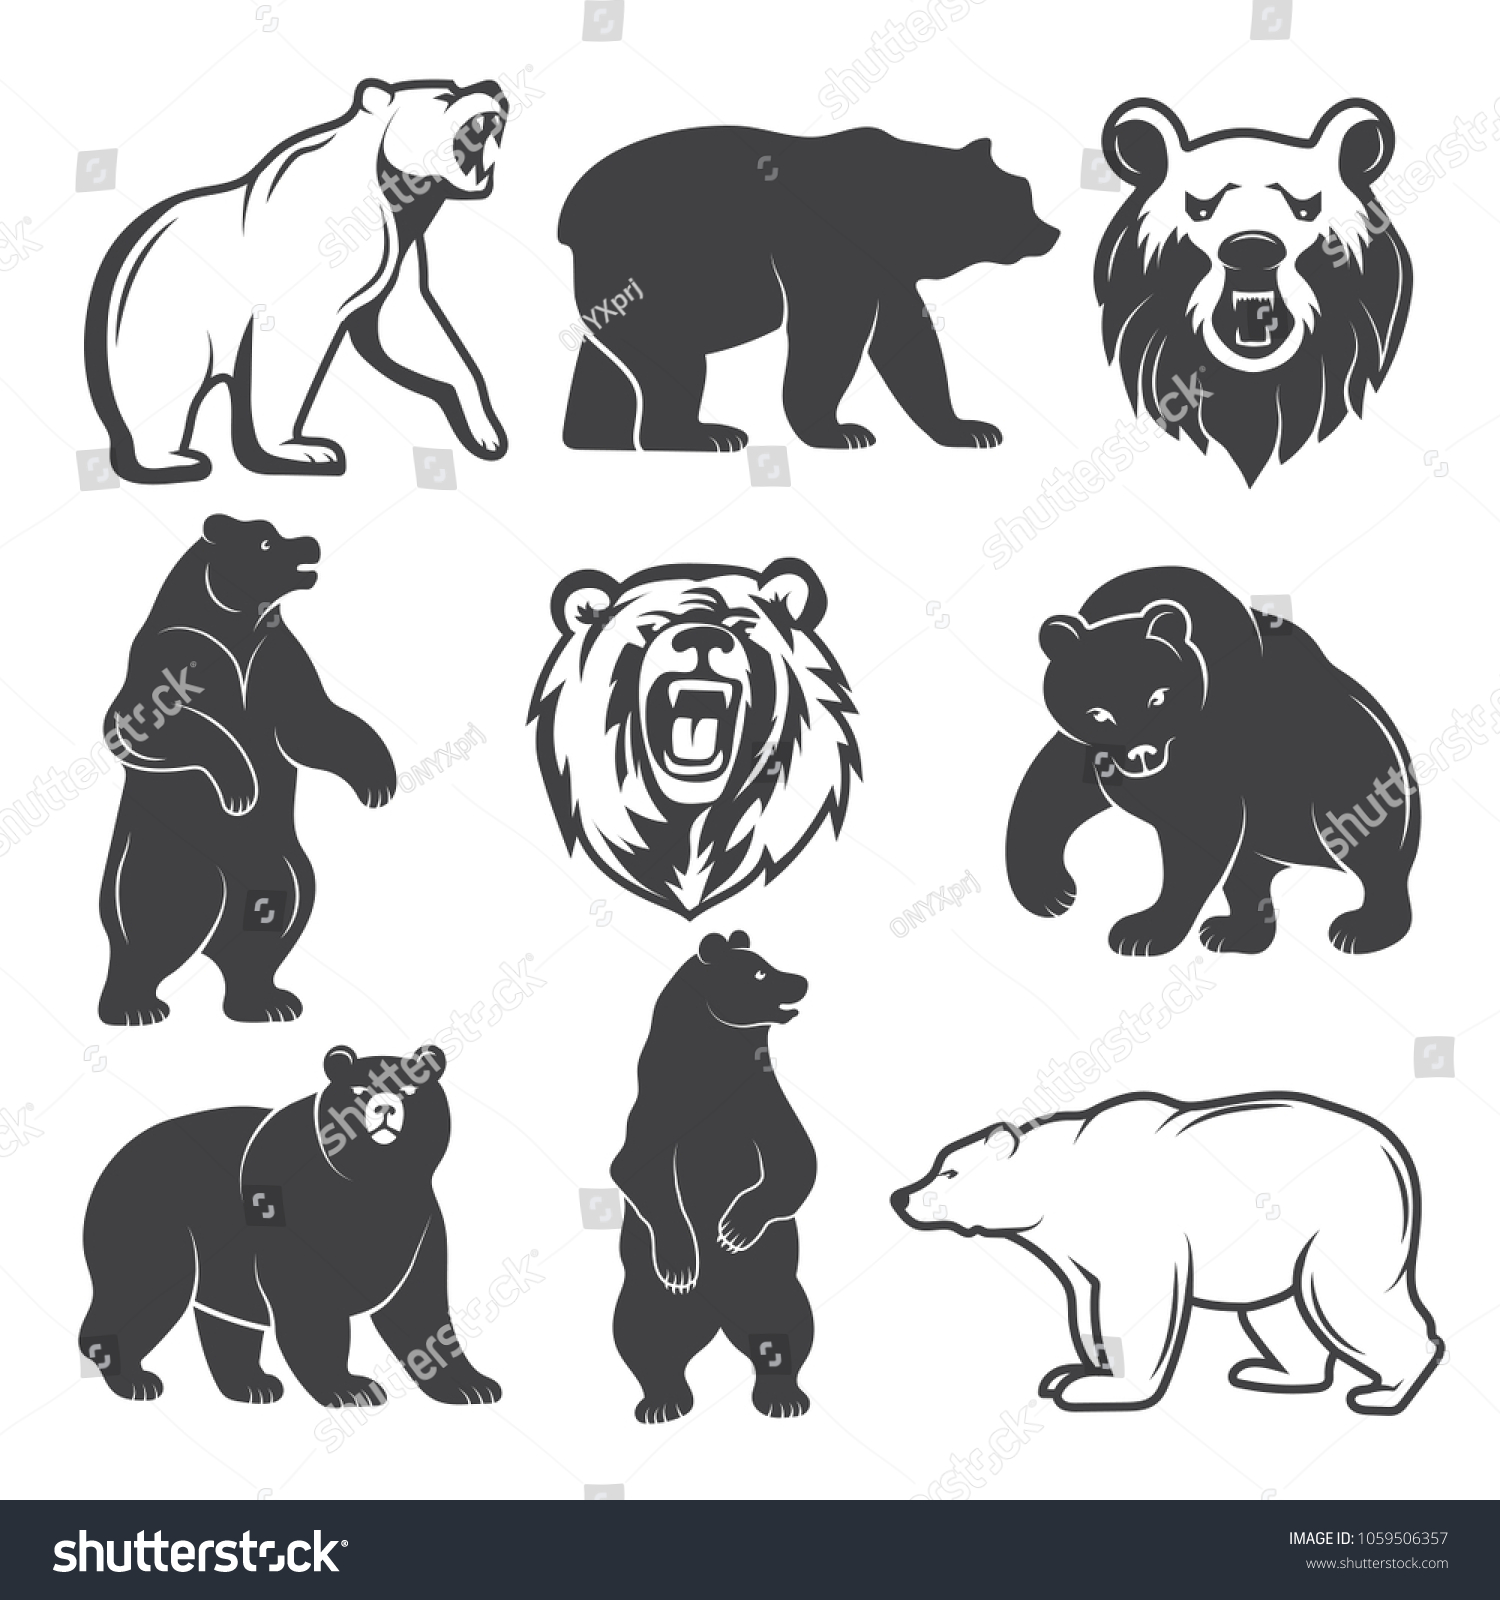 SVG of Monochrome illustrations of stylized bears. Pictures set for logos or badges design. Vector bear animal, wild mammal monochrome silhouette svg